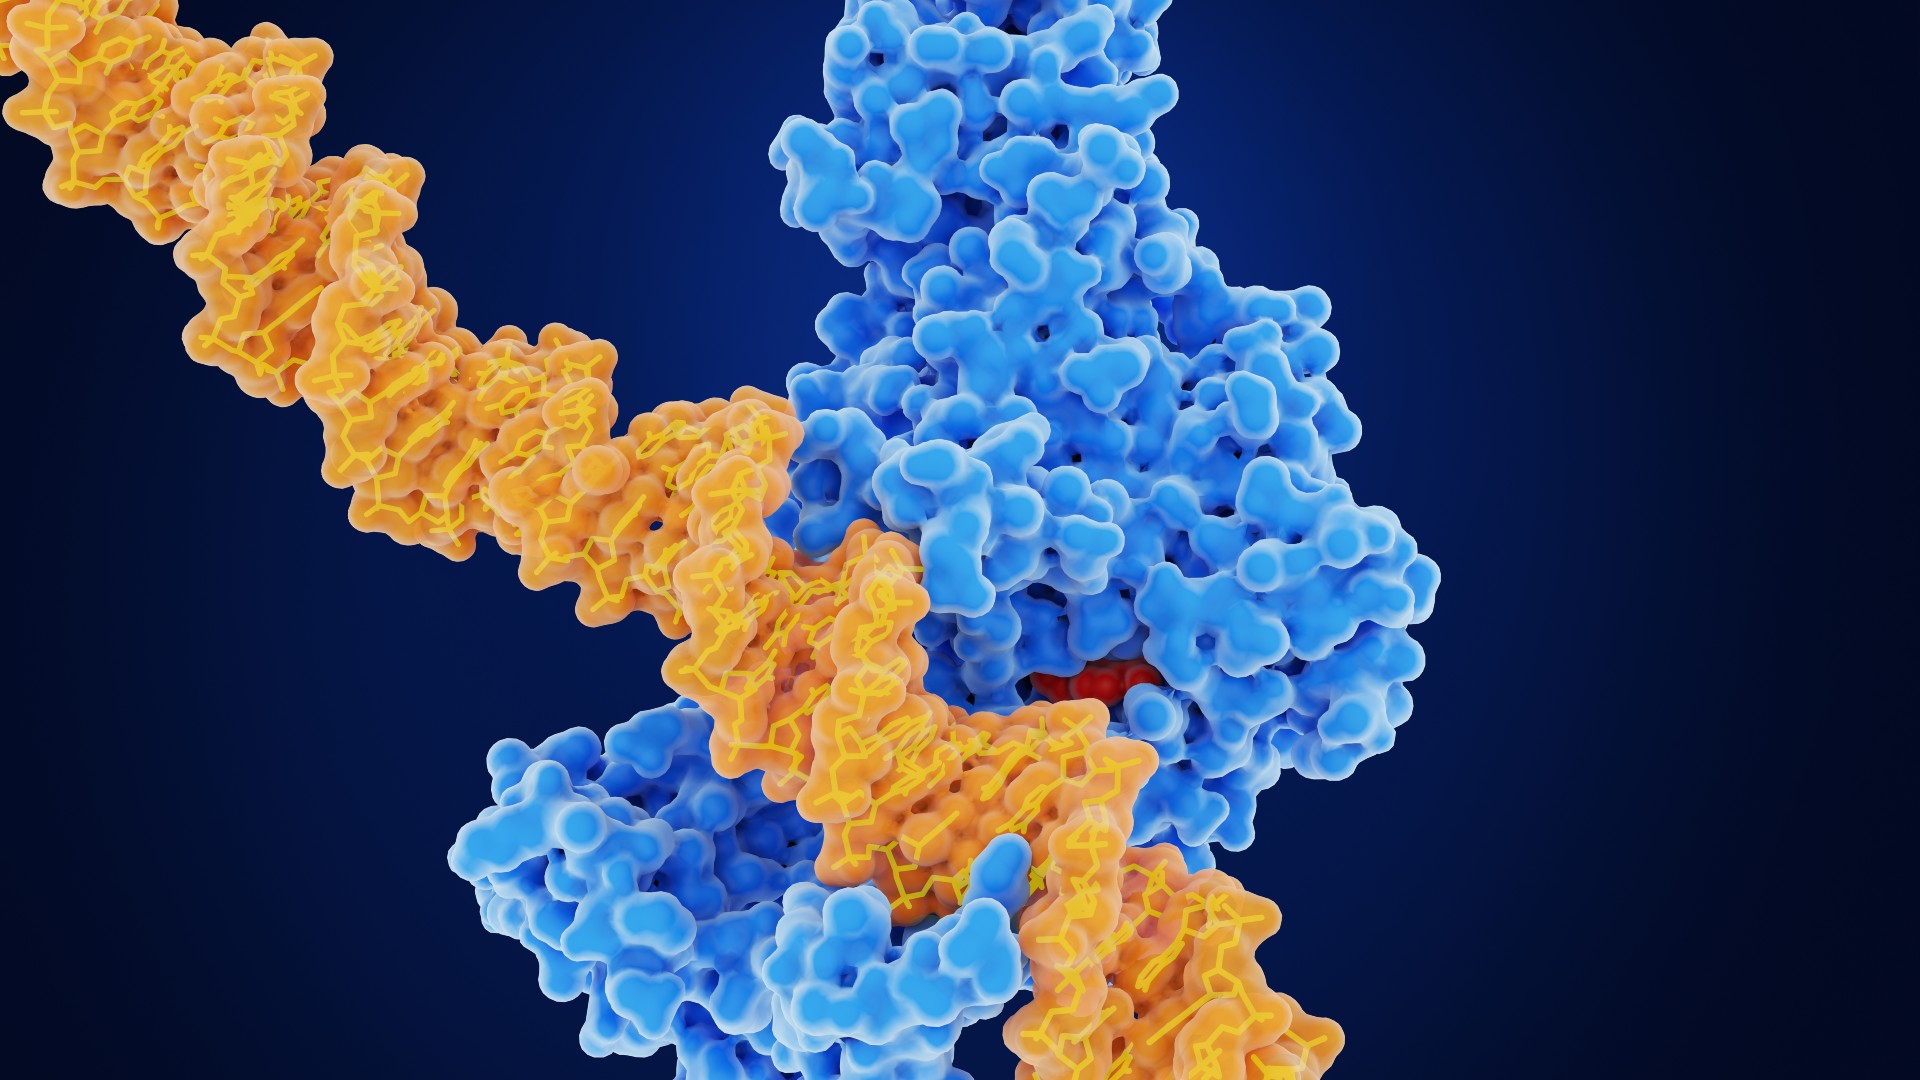 Medical illustration of the enzyme DNA methyl transferase in blue transferring a methyl group from S-adenosyl methionine in red to DNA in yellow